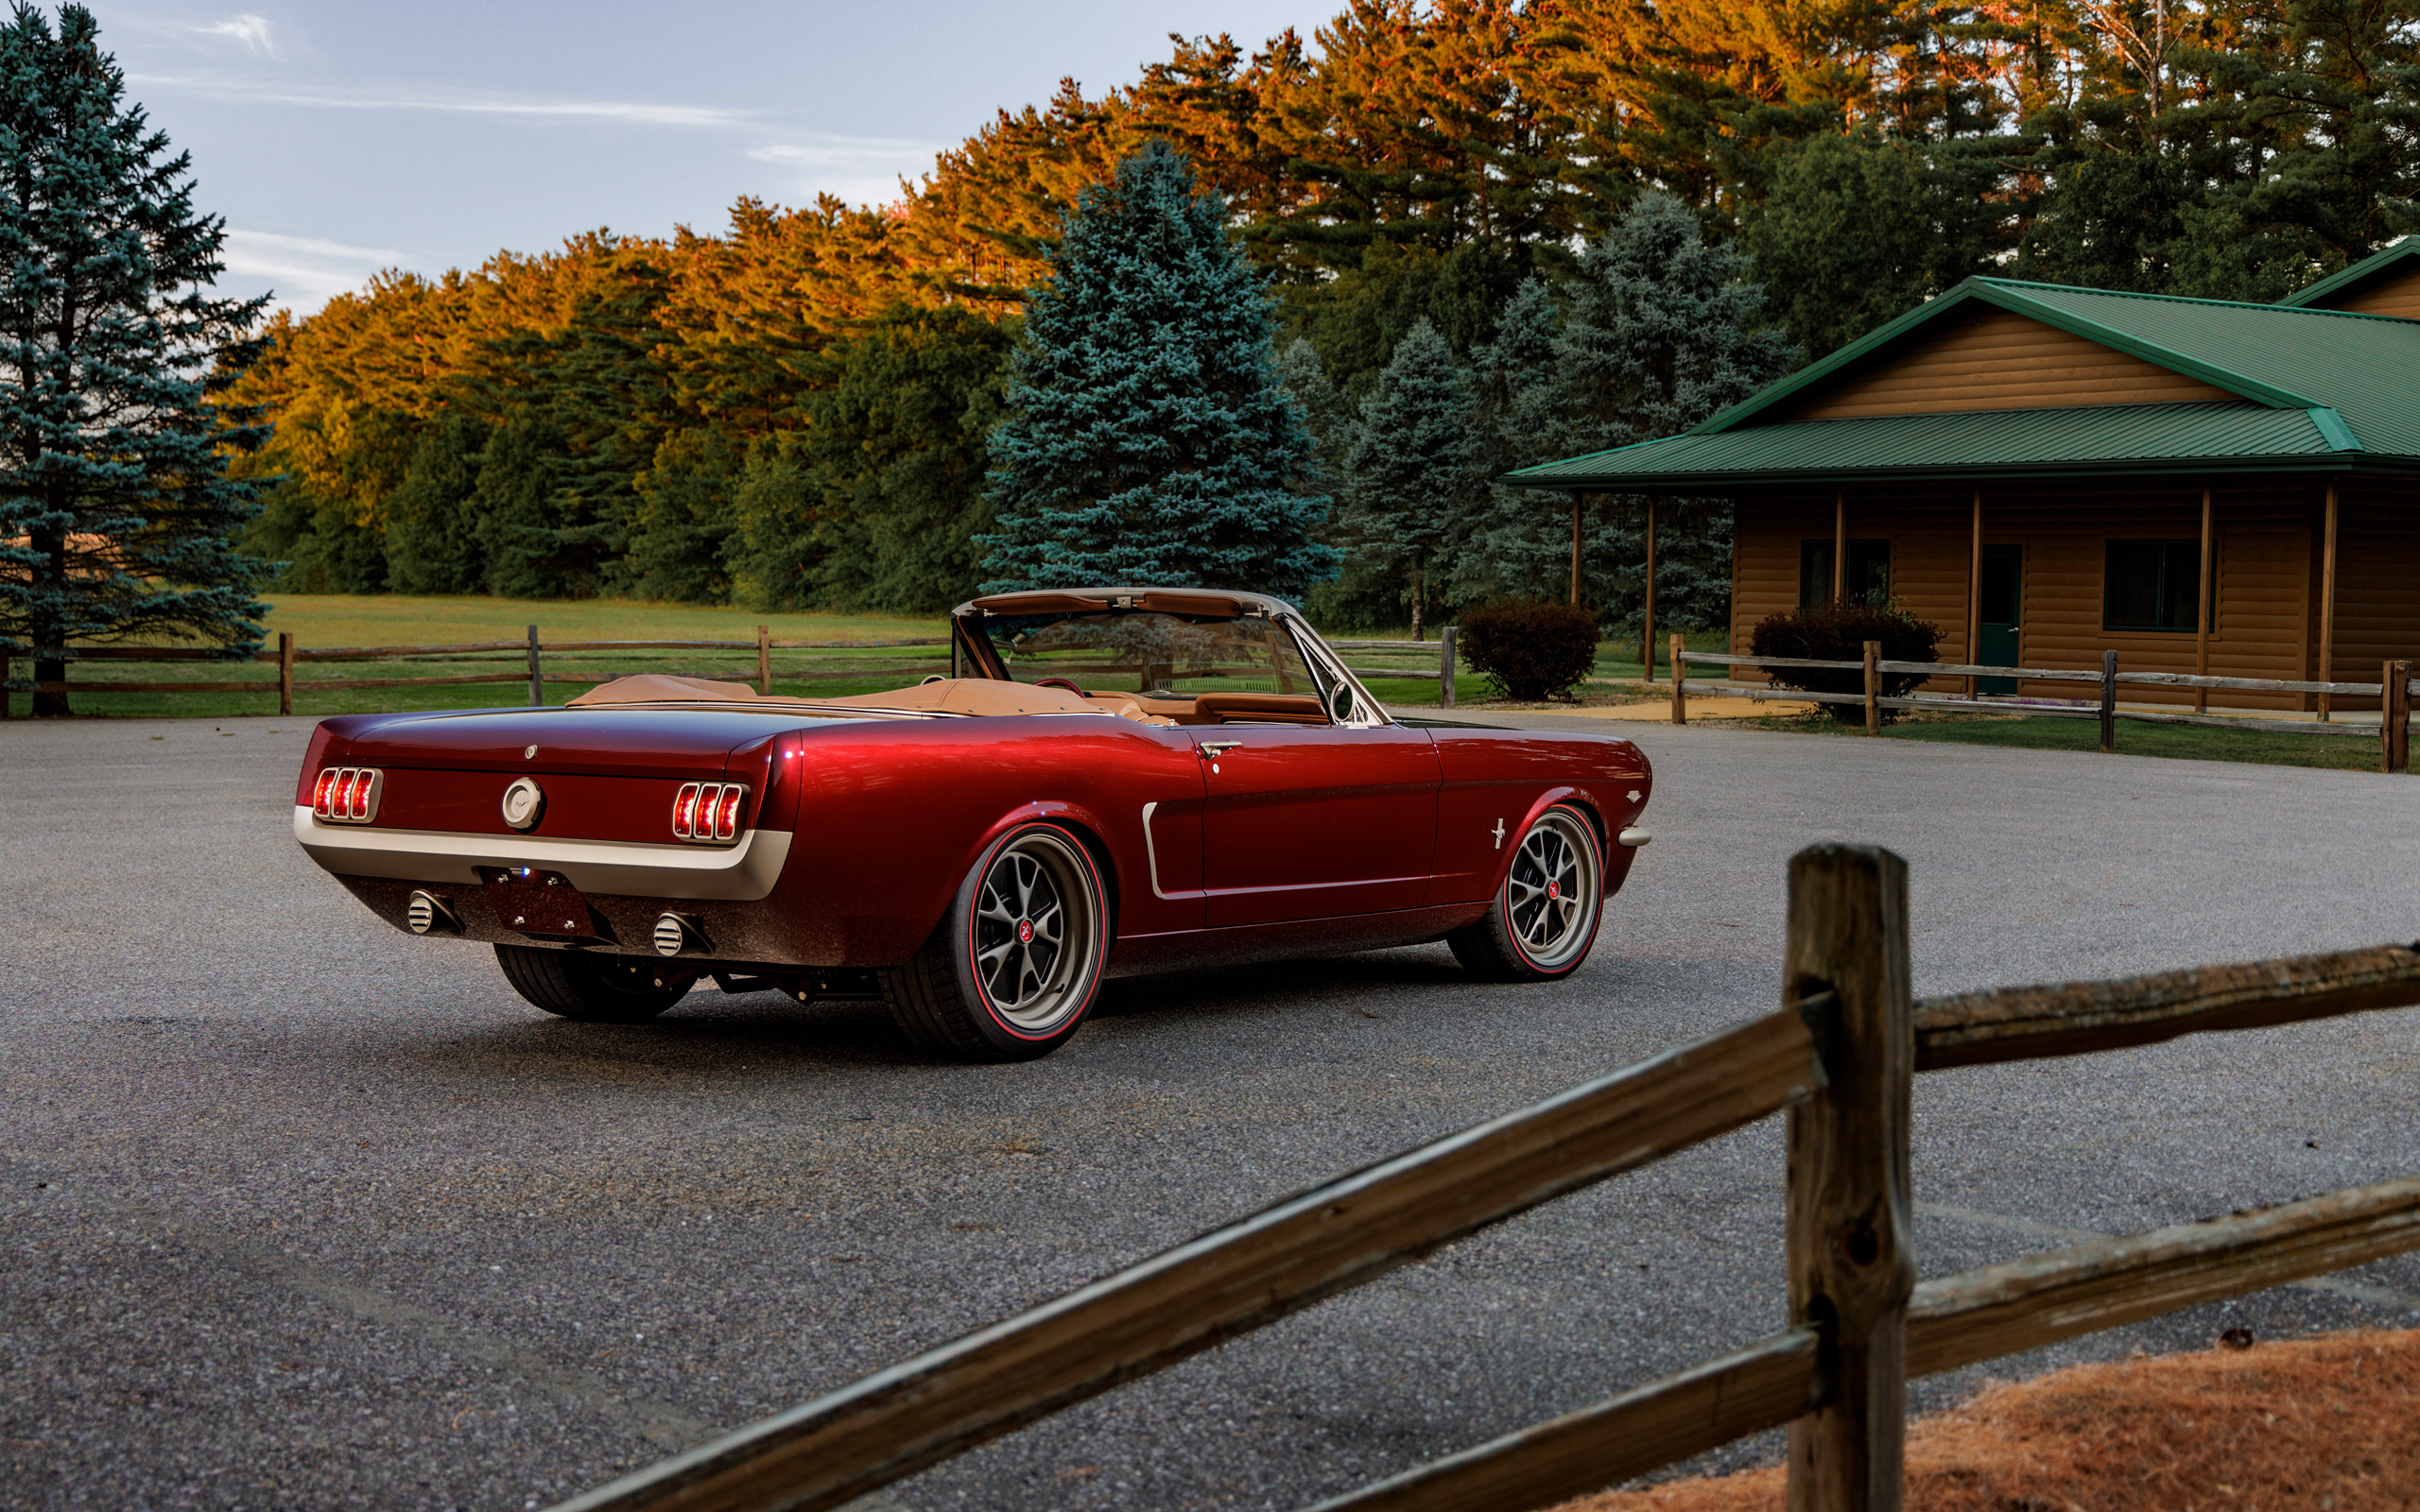  1965 Ringbrothers Ford Mustang Convertible Uncaged Wallpaper.